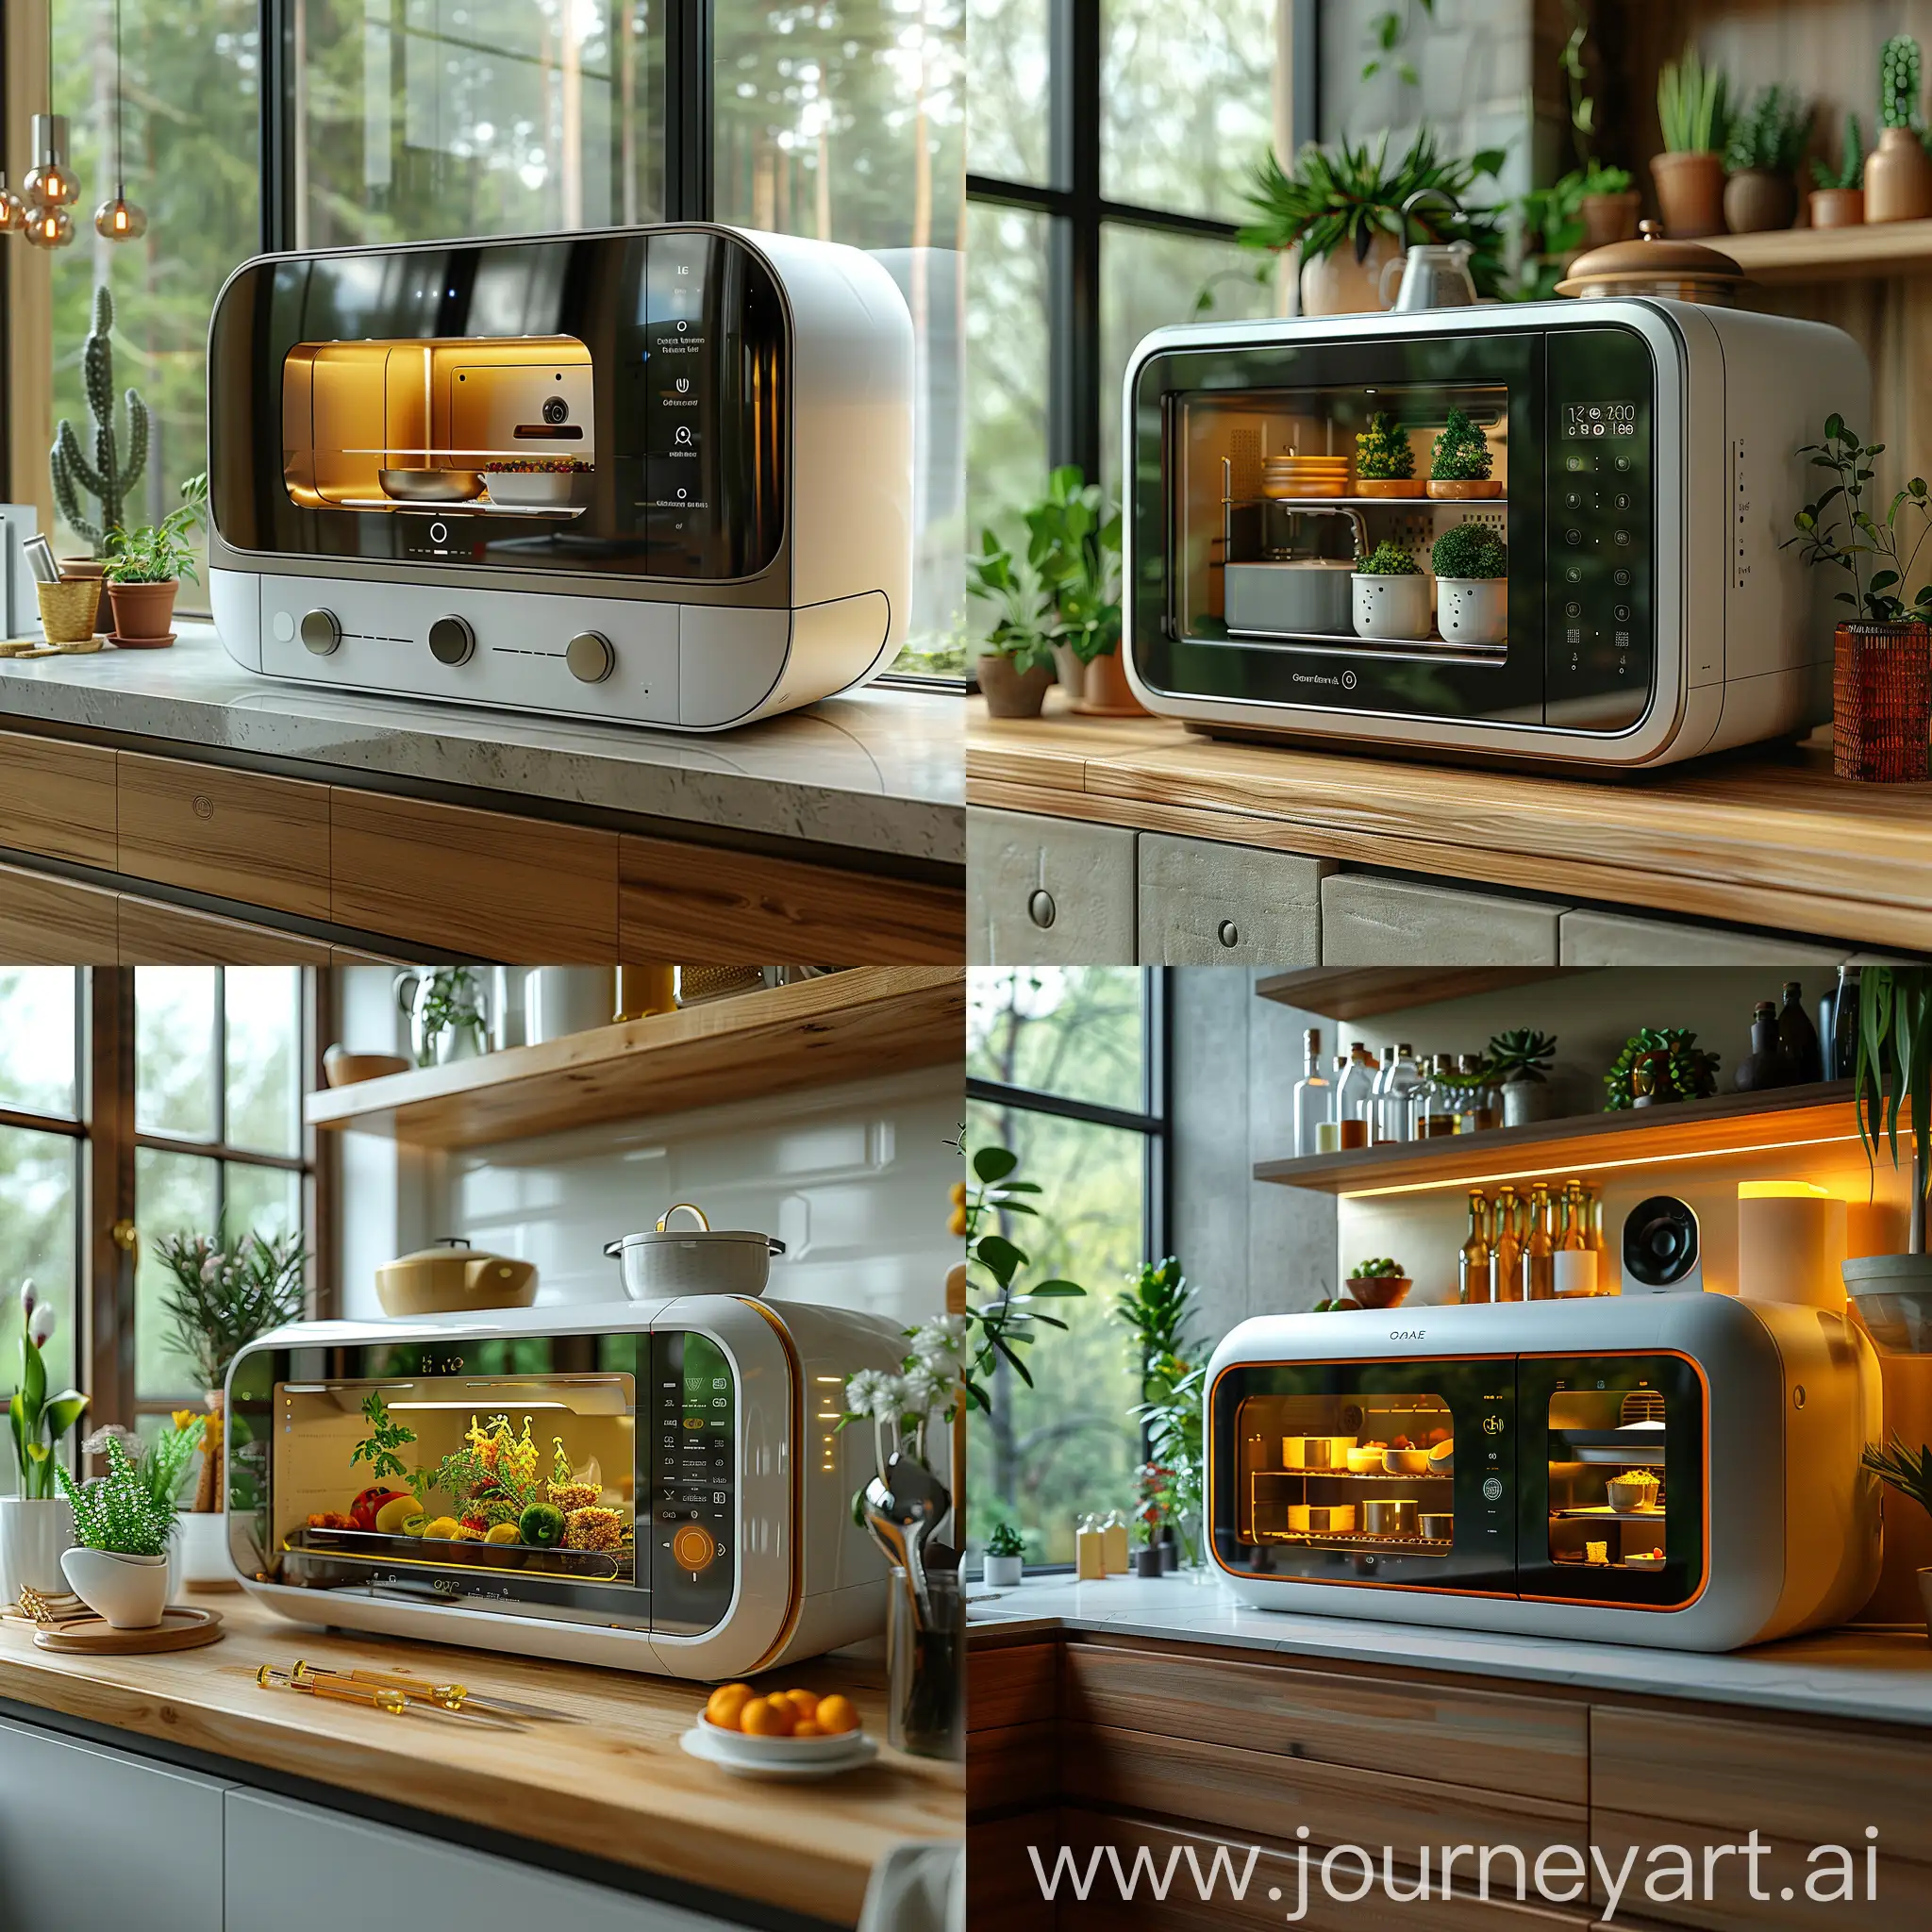 Futuristic-SolarPowered-Microwave-Smart-Cooking-with-EcoFriendly-Features